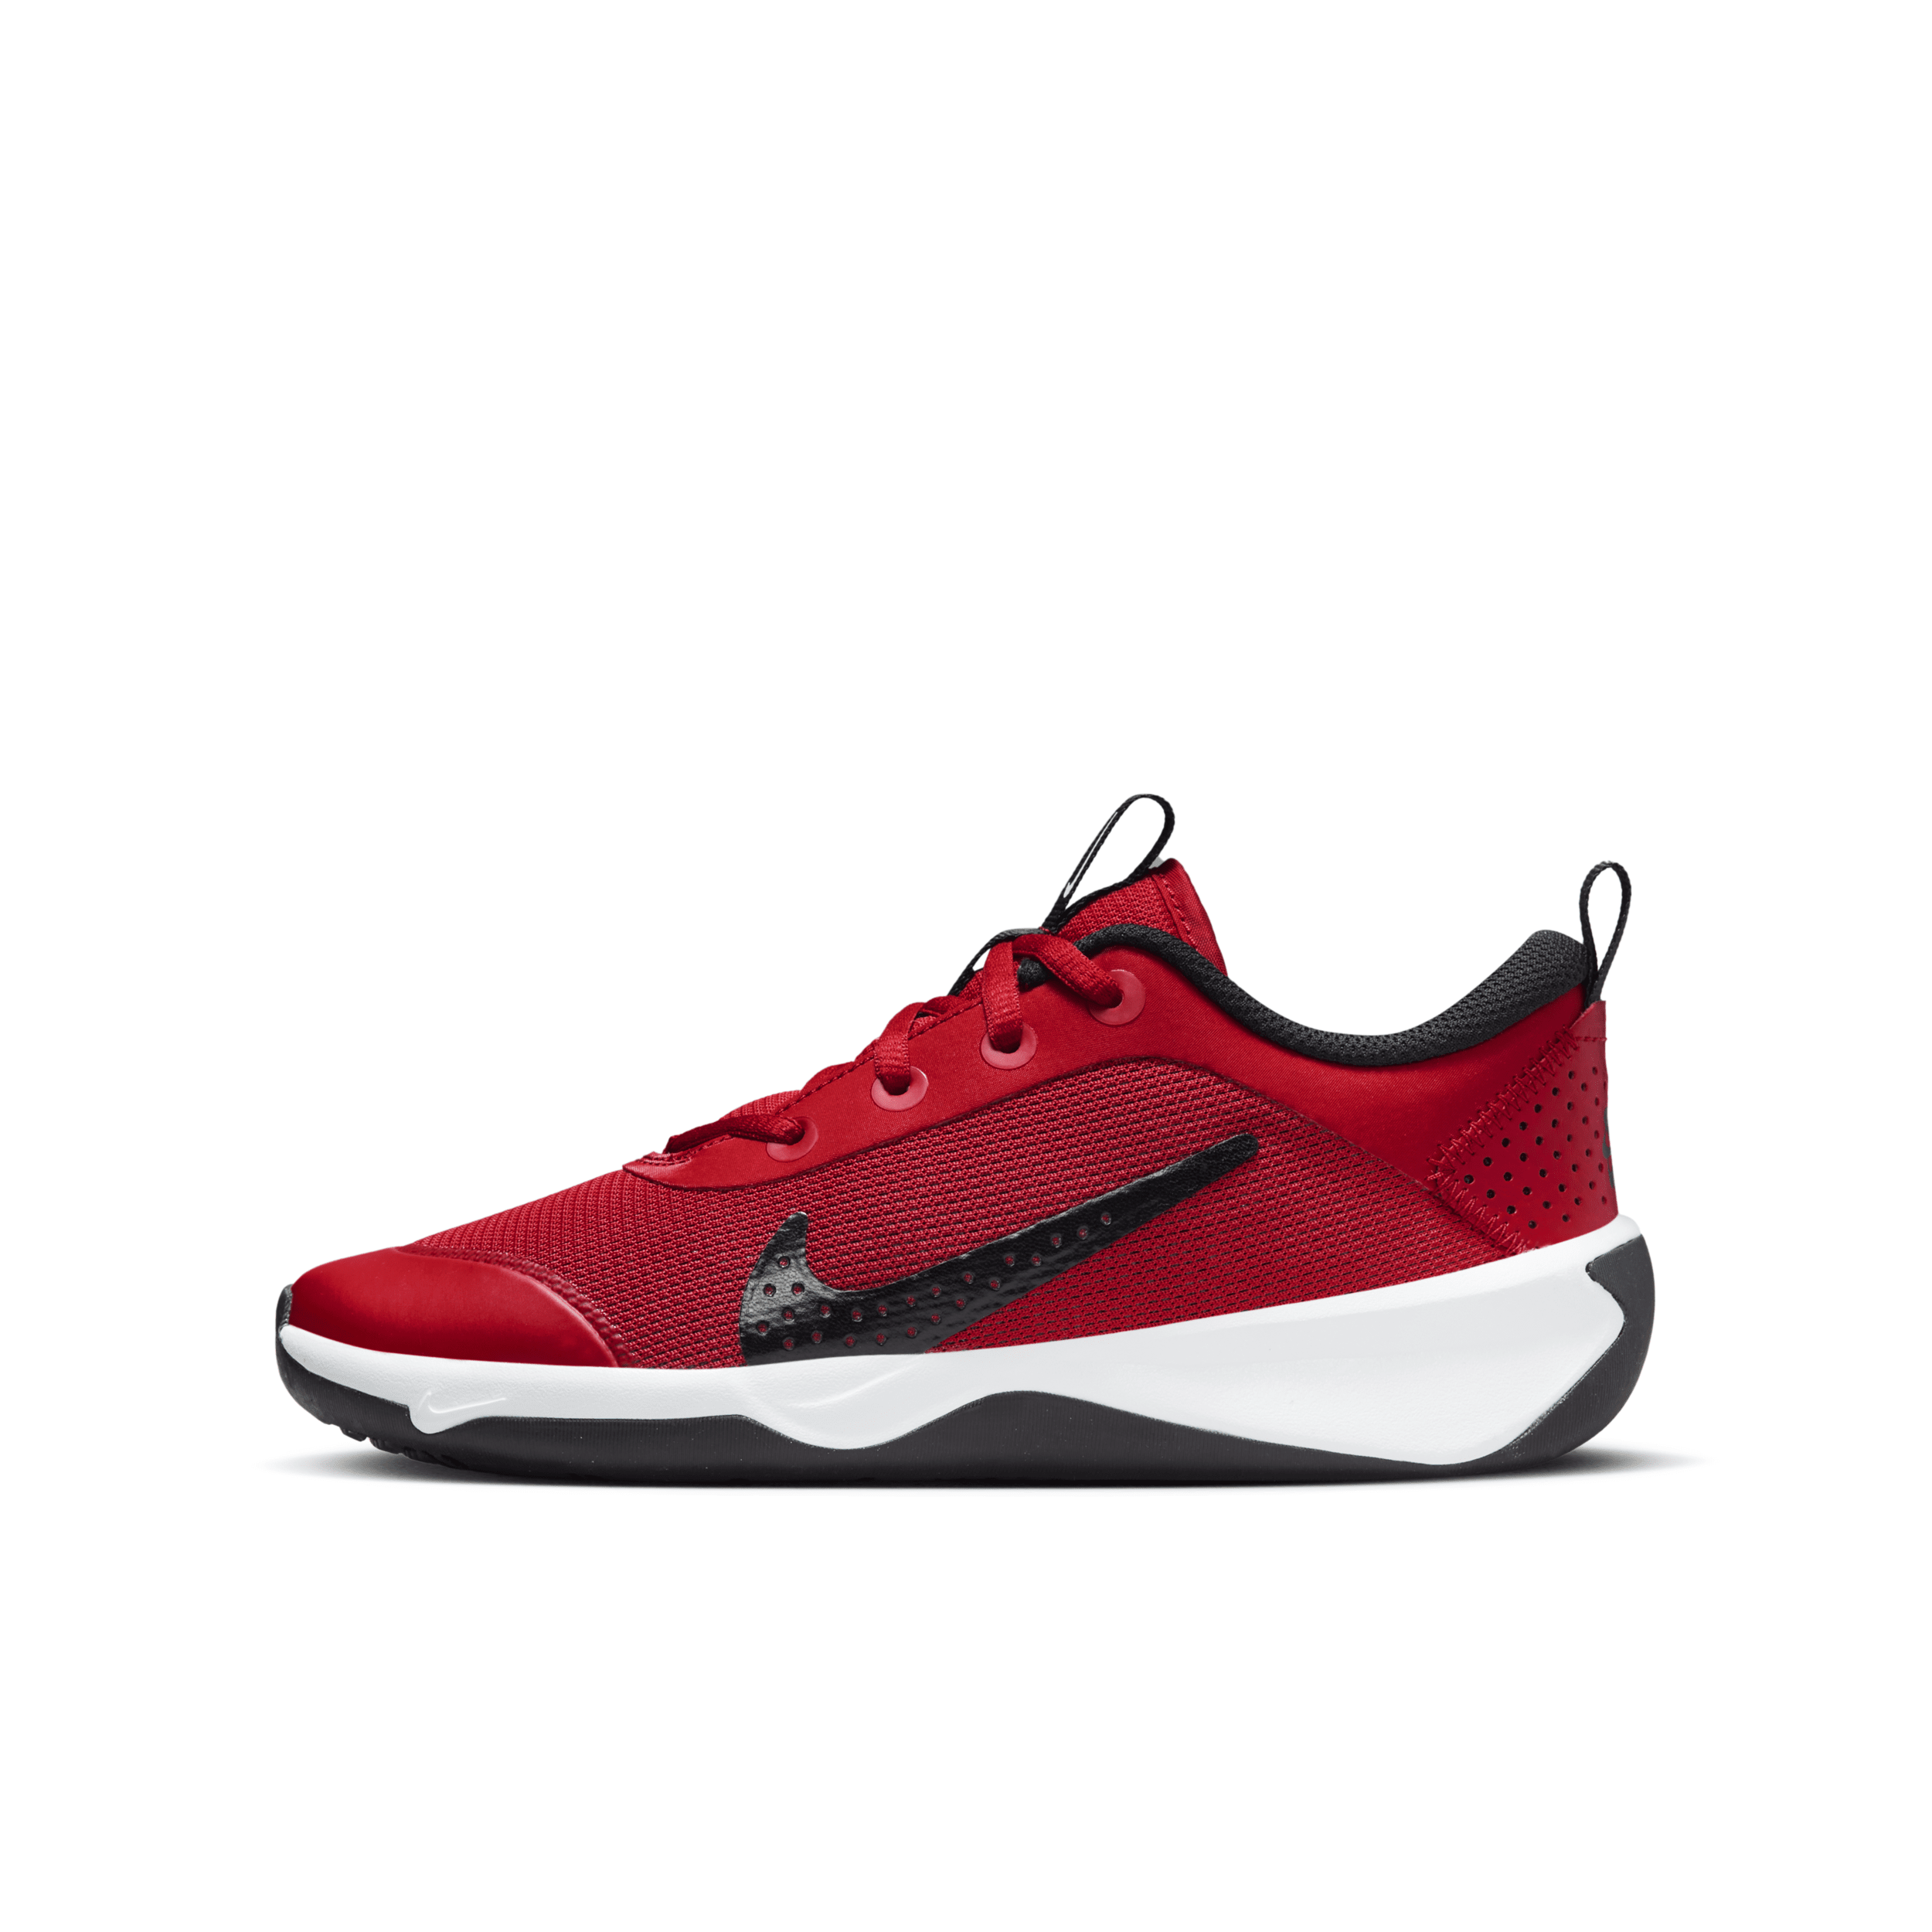 Nike Omni Multi-court Big Kids' Indoor Court Shoes In Red